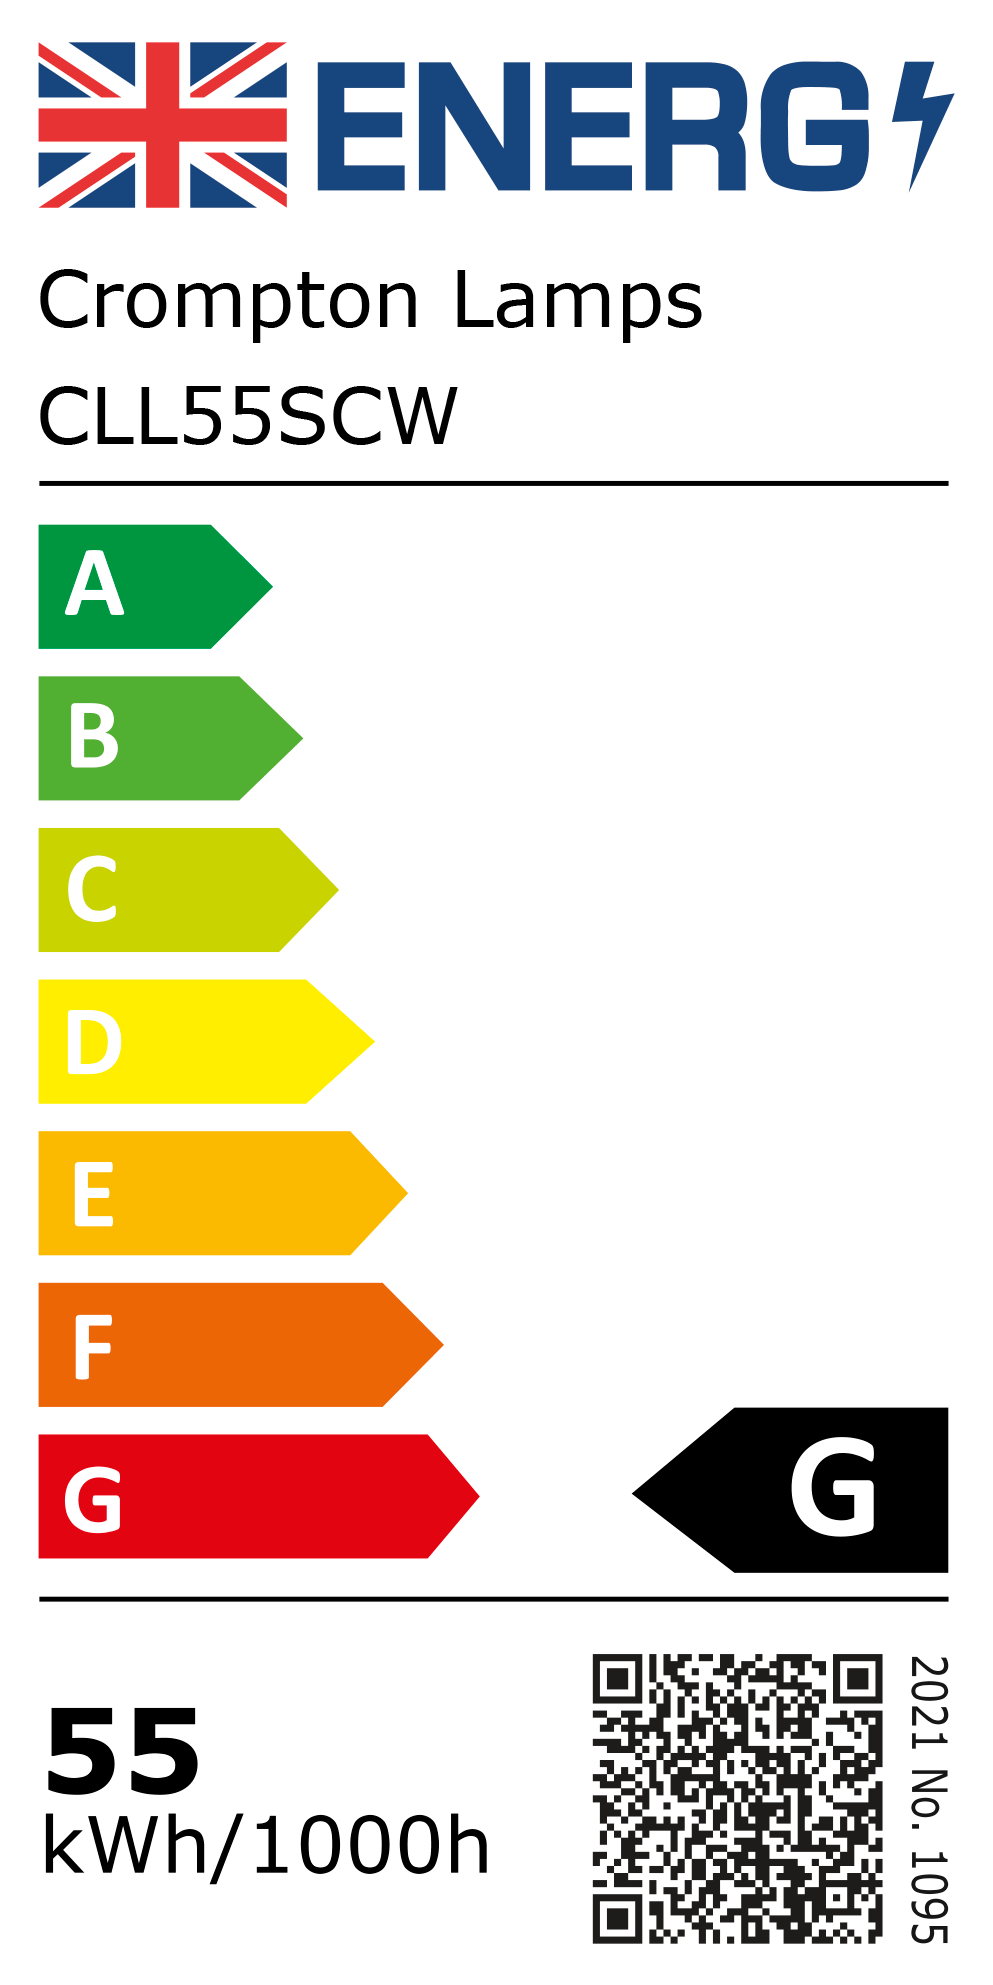 New 2021 Energy Rating Label: Stock Code CLL55SCW